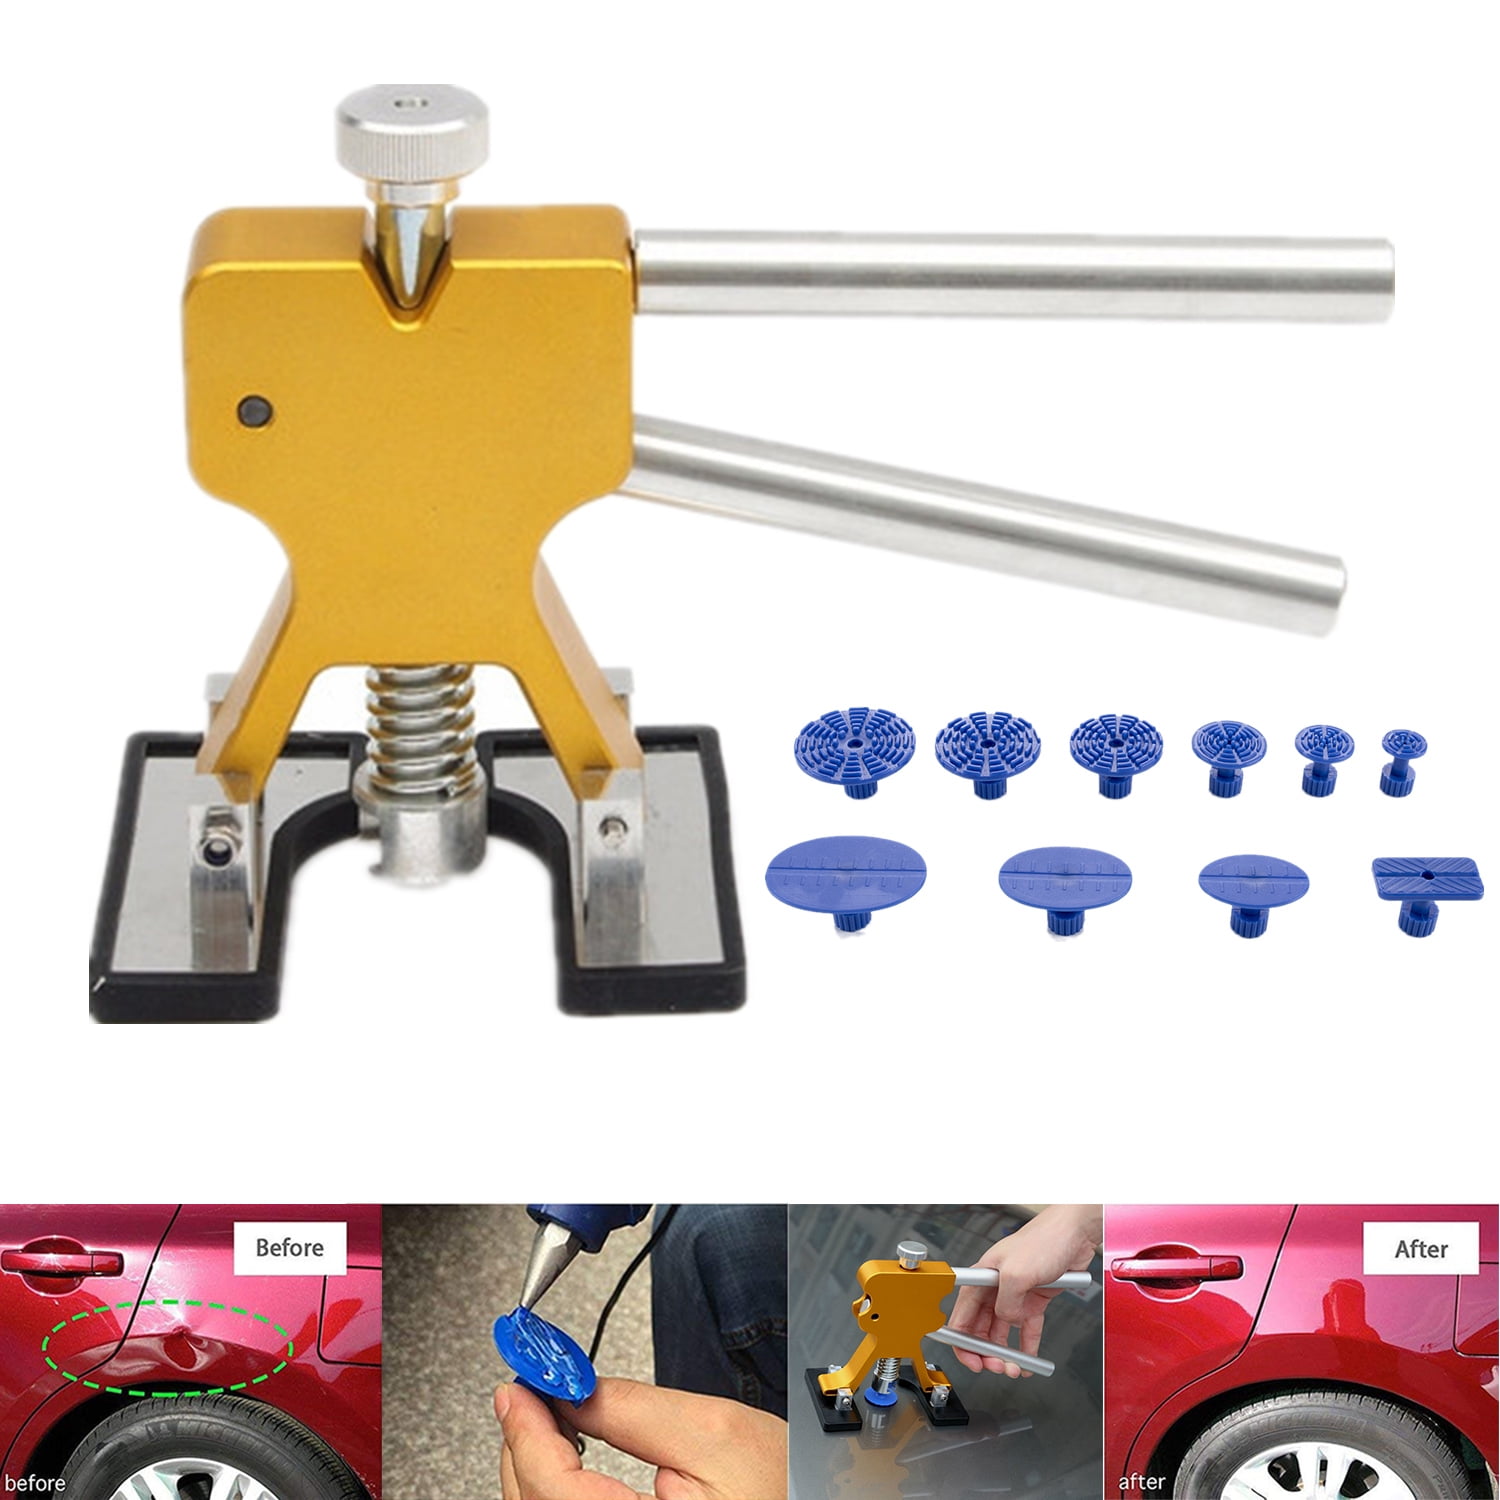 NEW Rod Tool Set professional Auto Paintless Lifter Dent Repair Hail Removal Kit 